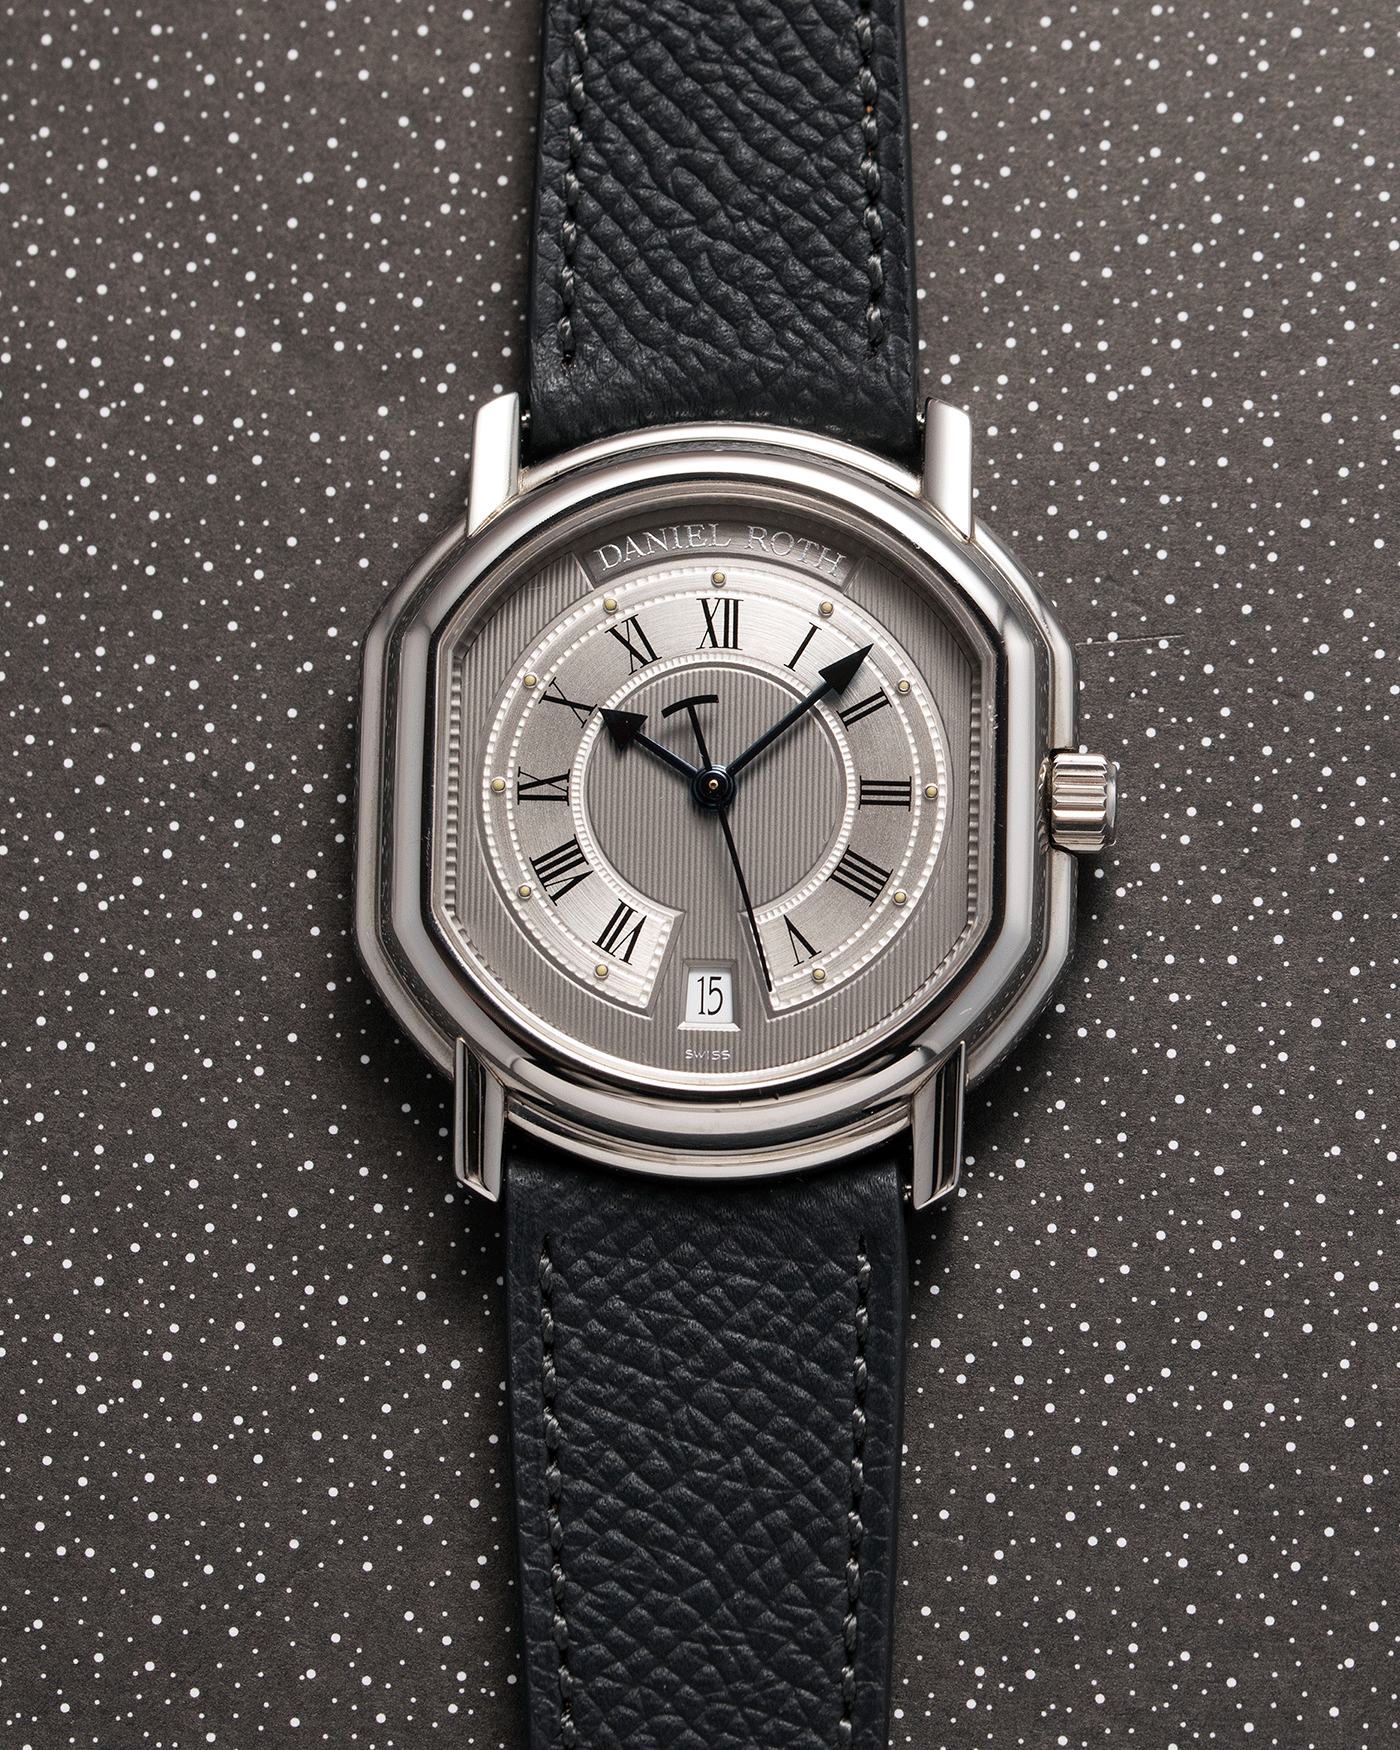 Brand: Daniel Roth Year: 1990’s Model: S177 Material: Stainless Steel Case Diameter: 35mmX38mm Bracelet/Strap: Molequin Anthracite Grained Calf with Generic Stainless Steel Tang Buckle